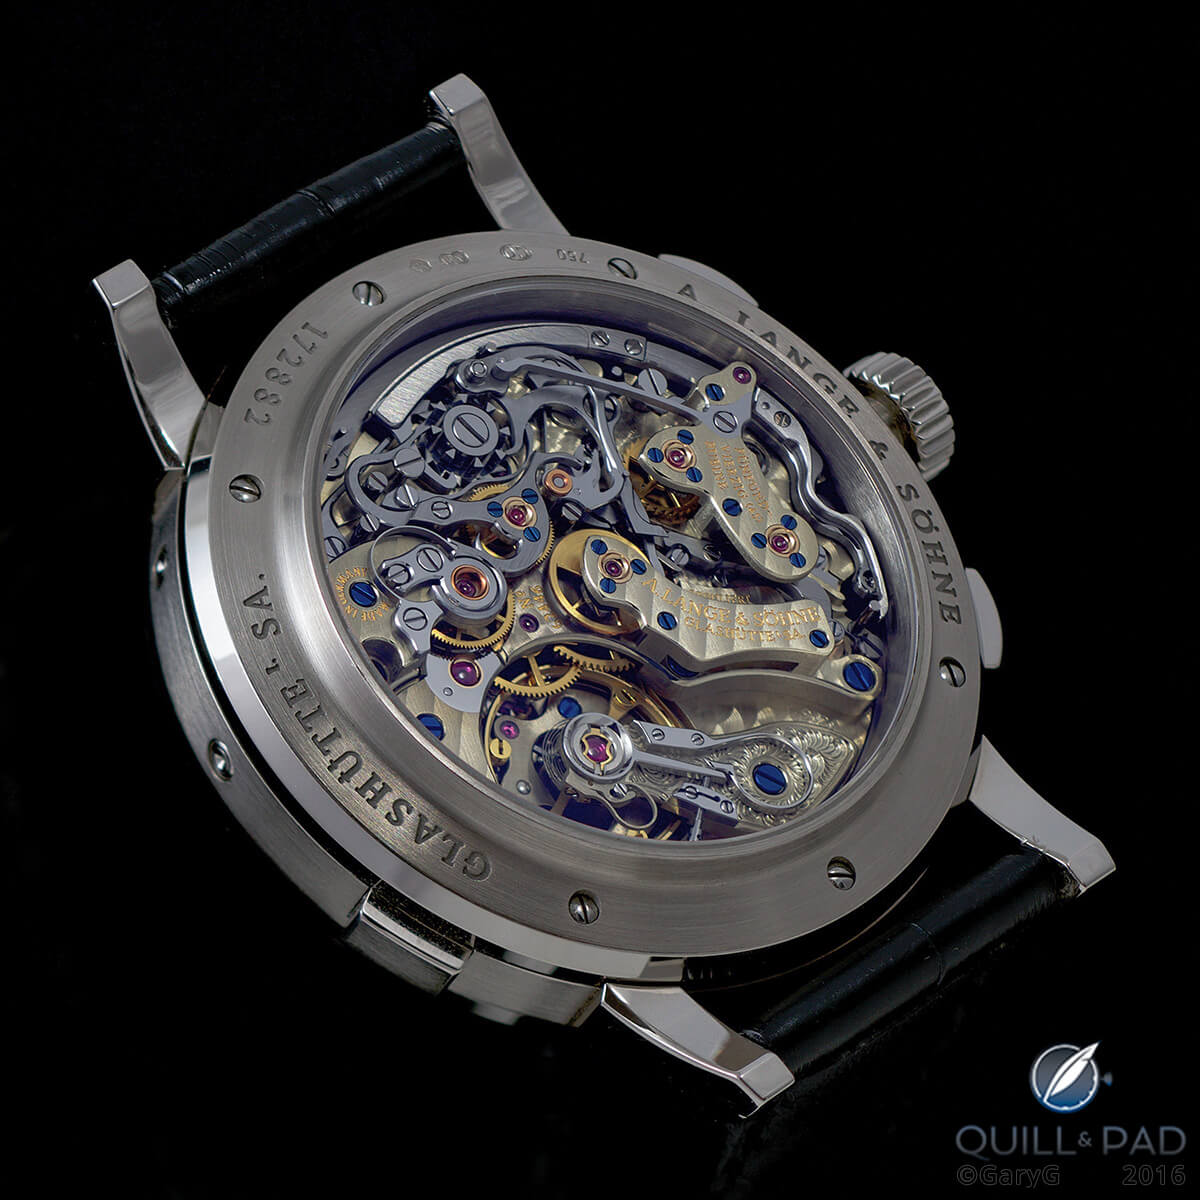 Worth the wait: movement of the A. Lange & Söhne Datograph Perpetual